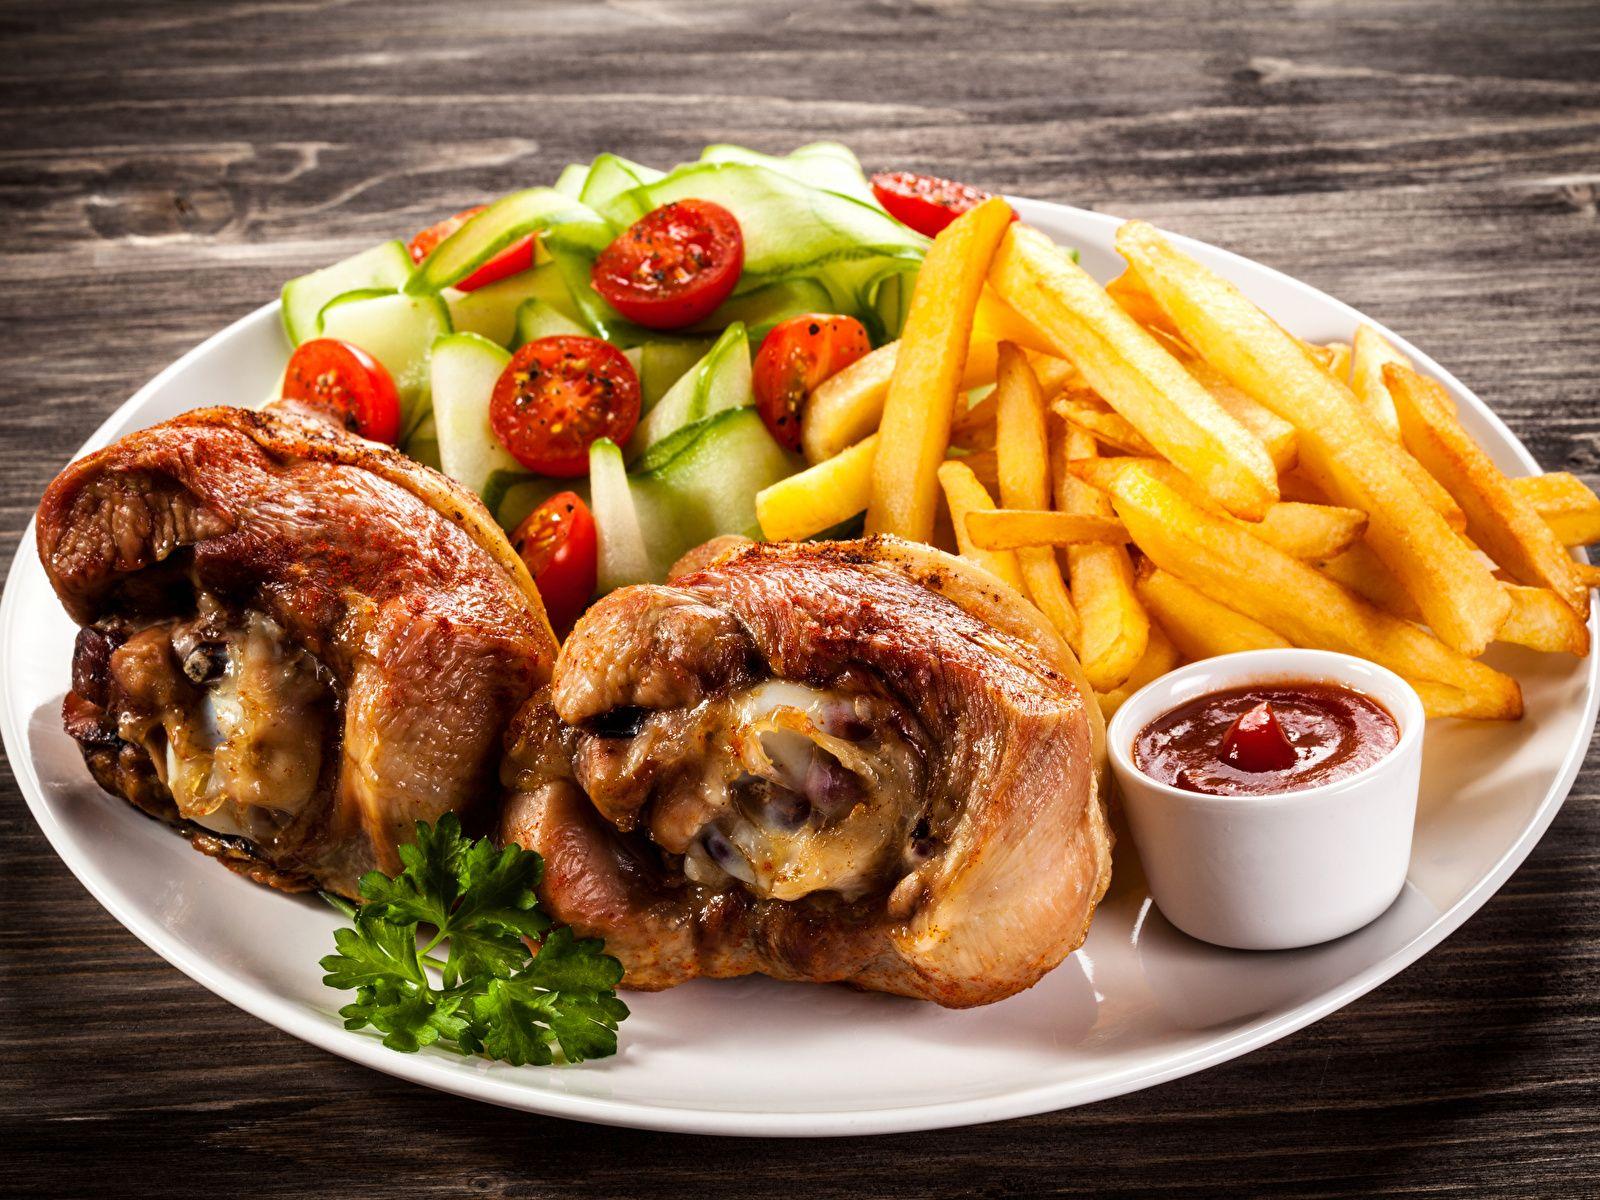 Chicken Desktop Wallpaper.Picture Tomatoes French Fries Roast